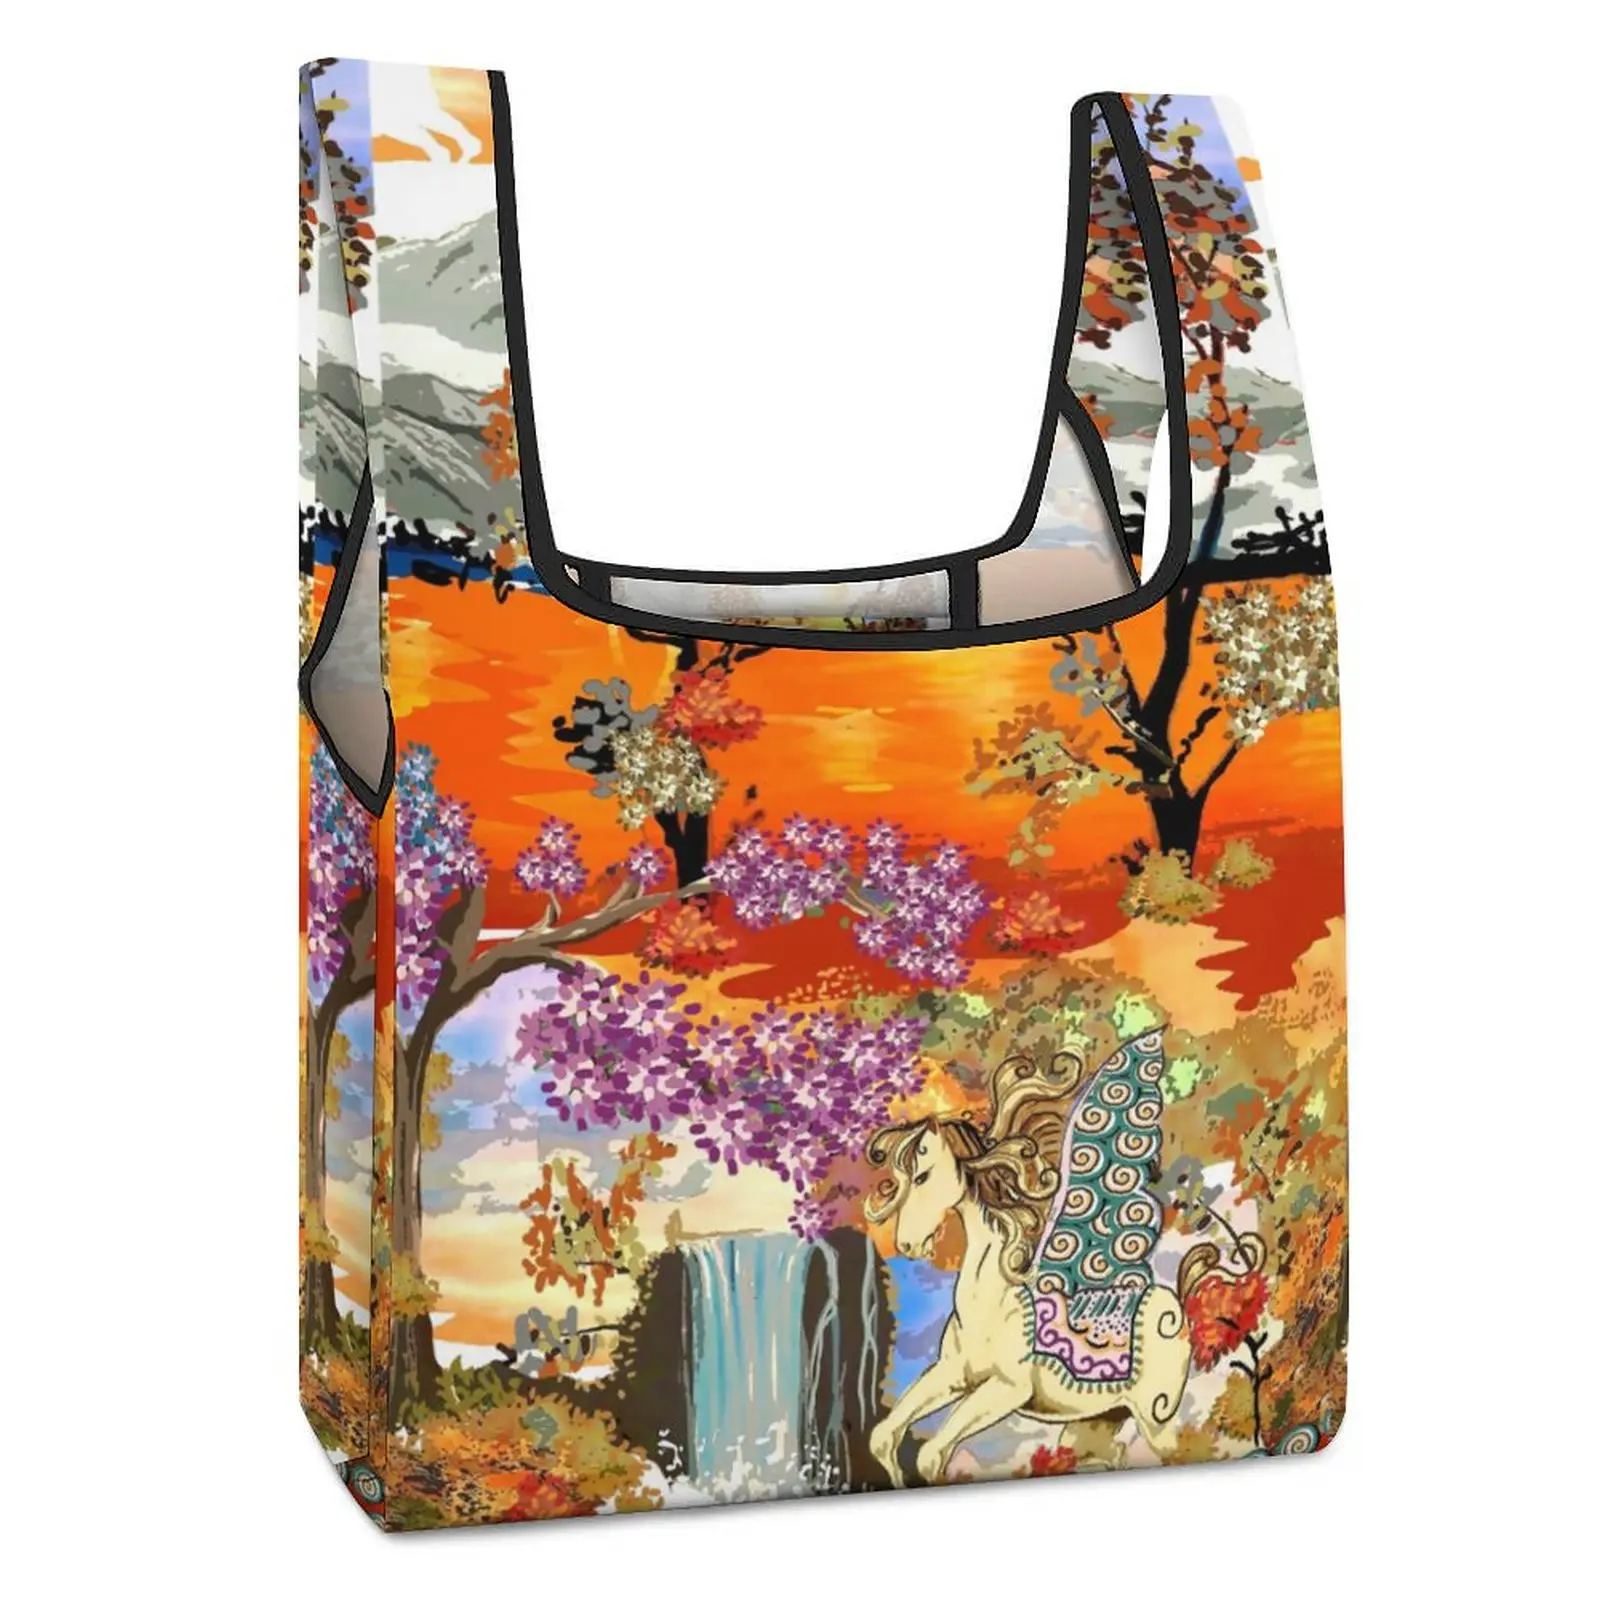 Customized Printed Collapsible Shopping Bag Double Strap Handbag Colored Printing Tote Casual Woman Grocery Bag Custom Pattern lvyziho custom name big bag weekender bag giant grocery bag maxi tote bag oversized canvas bag extra large canvas bag